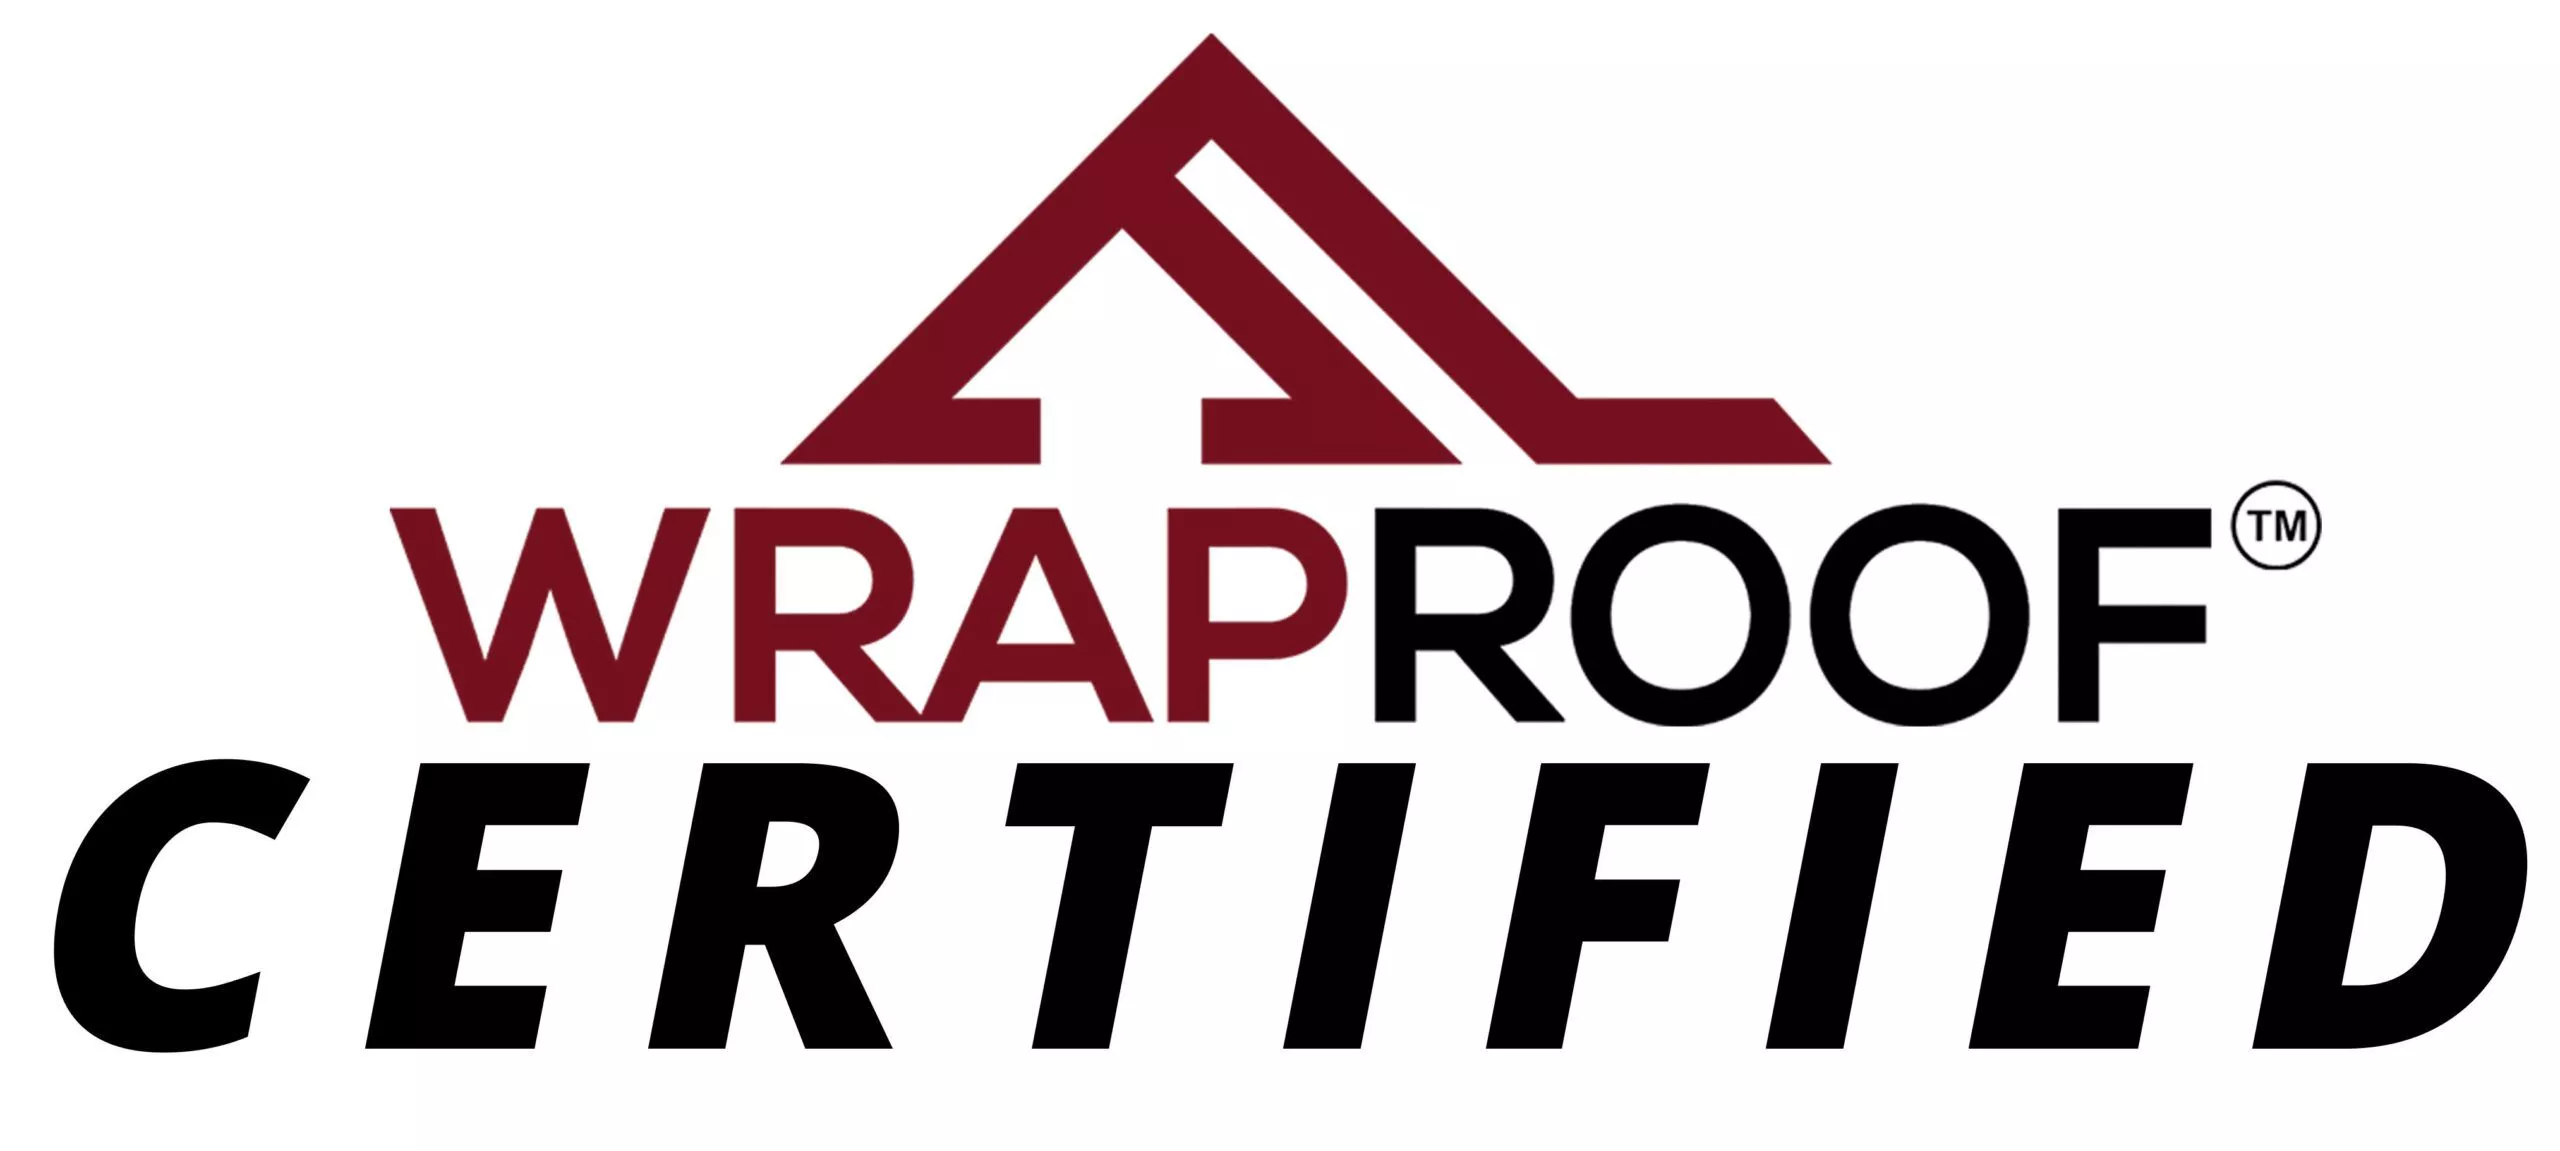 wraproof, all star roofers, roofing installation, roofers, roofing contractors, temporary roof